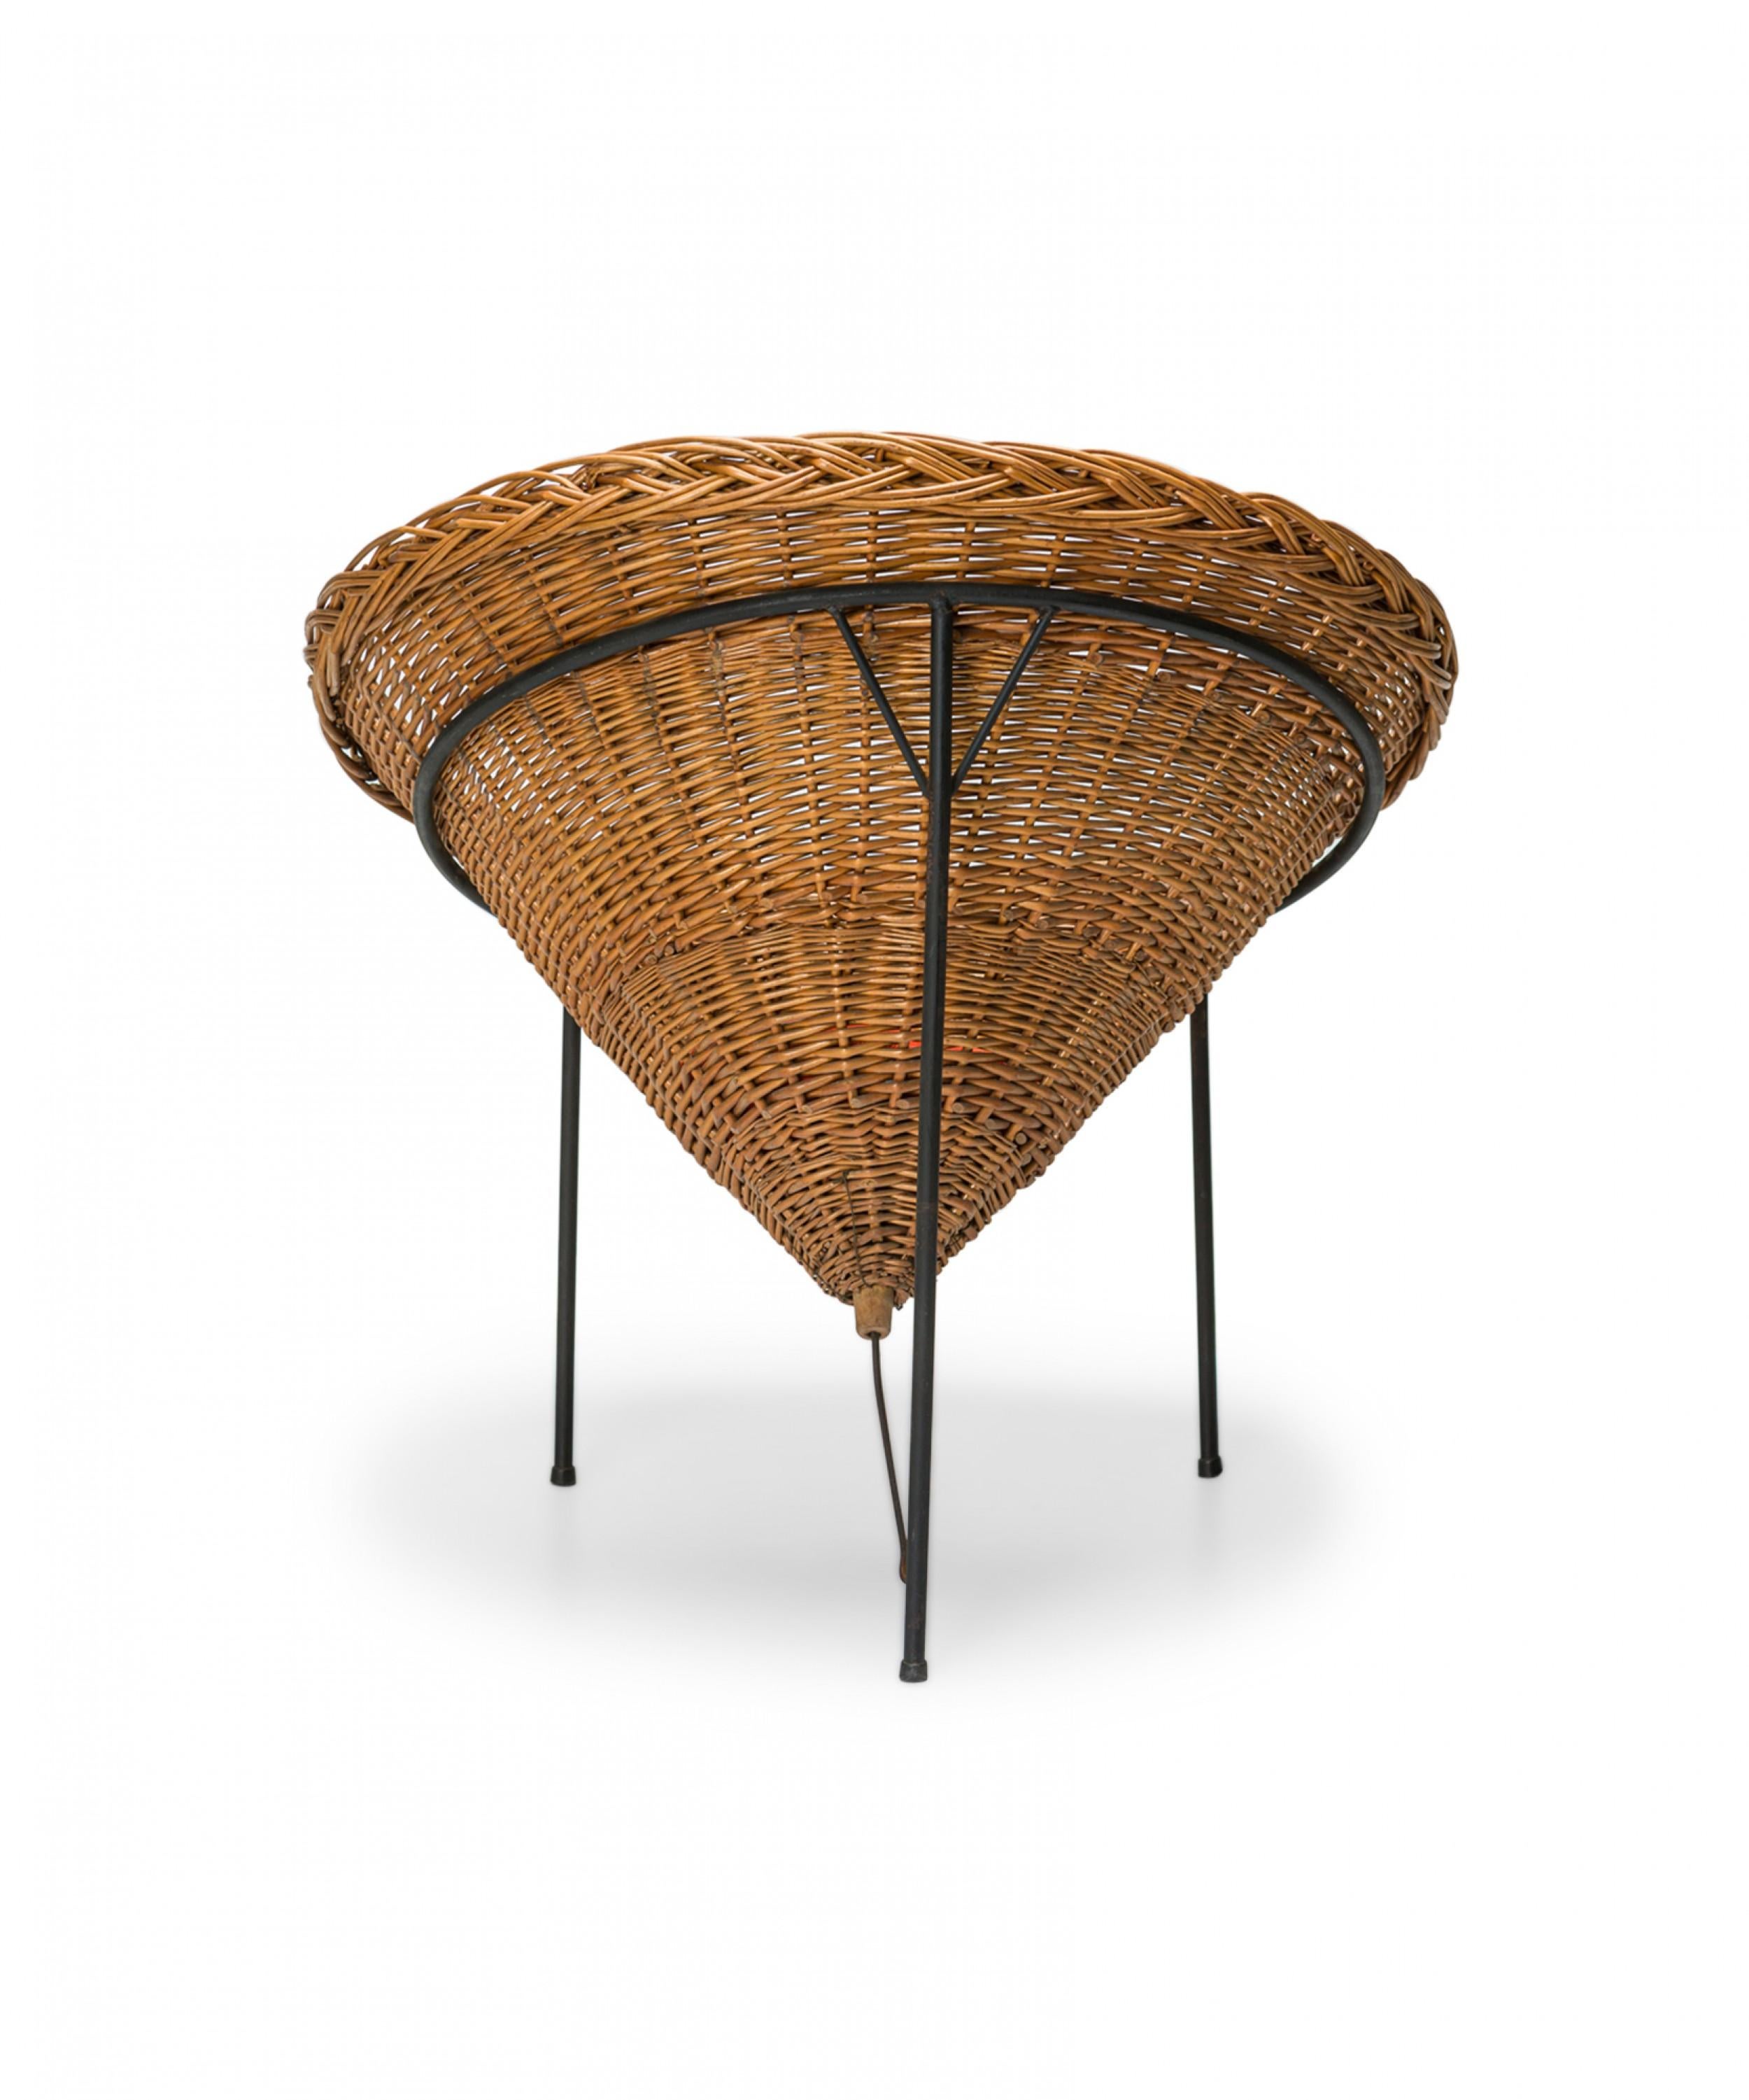 20th Century Italian Woven Wicker Conical Basket Chair For Sale